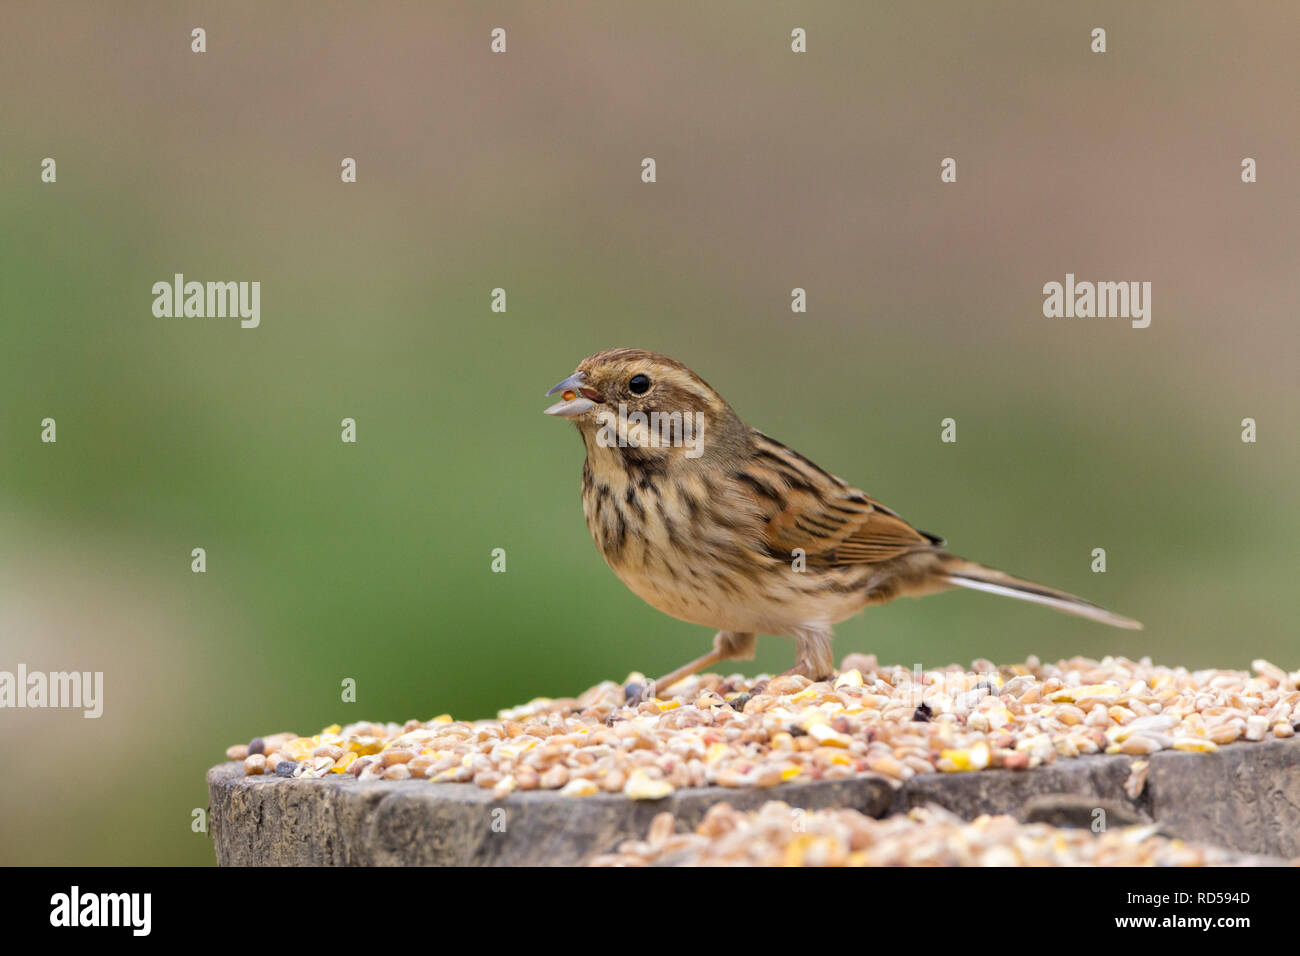 Female reed bunting (Emberiza schoeniclus) on tree stump feeding on scattered seeds at a hide. Streaky winter plumage and white outer tail feathers Stock Photo